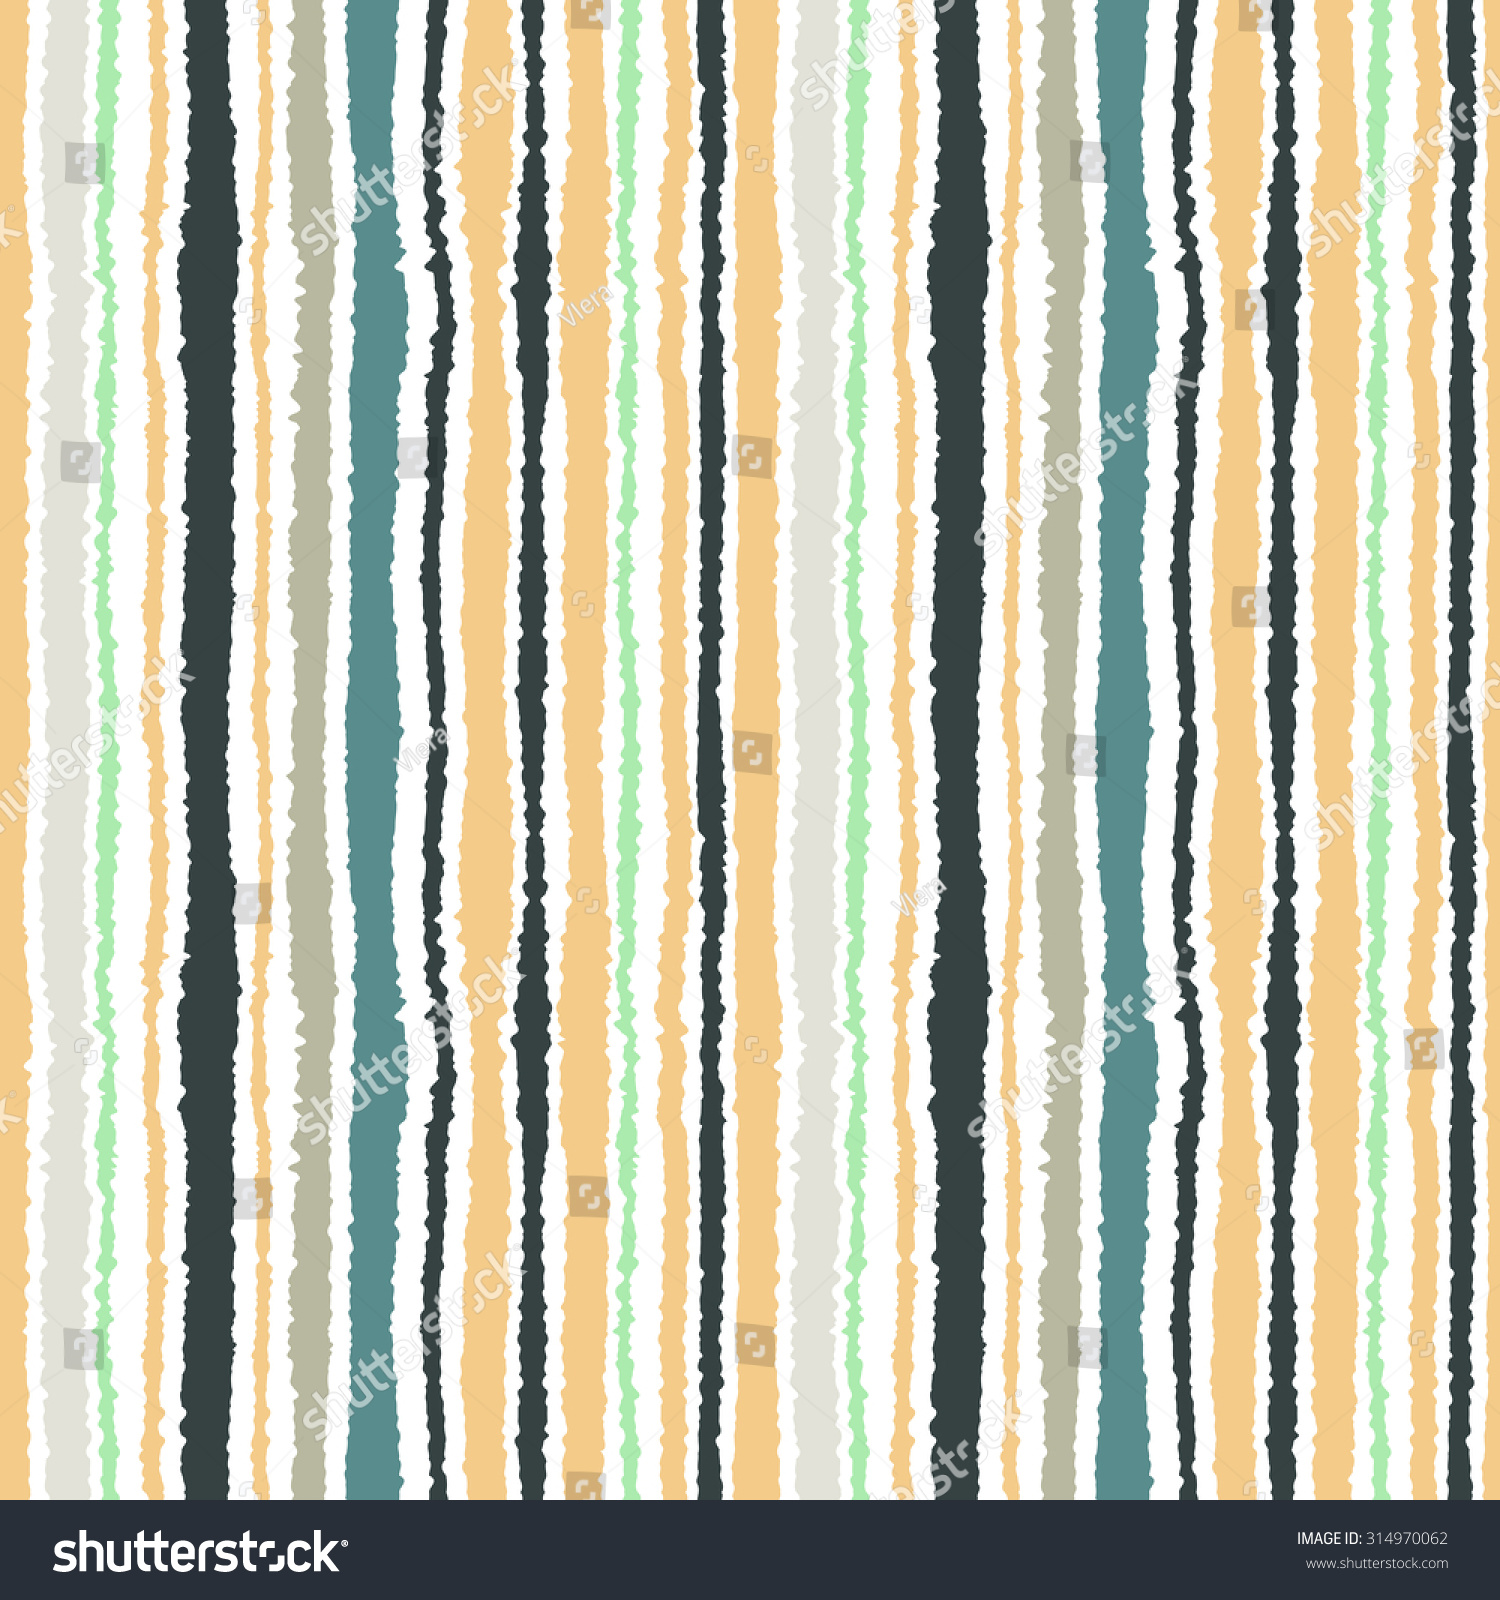 Seamless Strip Pattern Vertical Lines Torn Stock Vector (Royalty Free ...